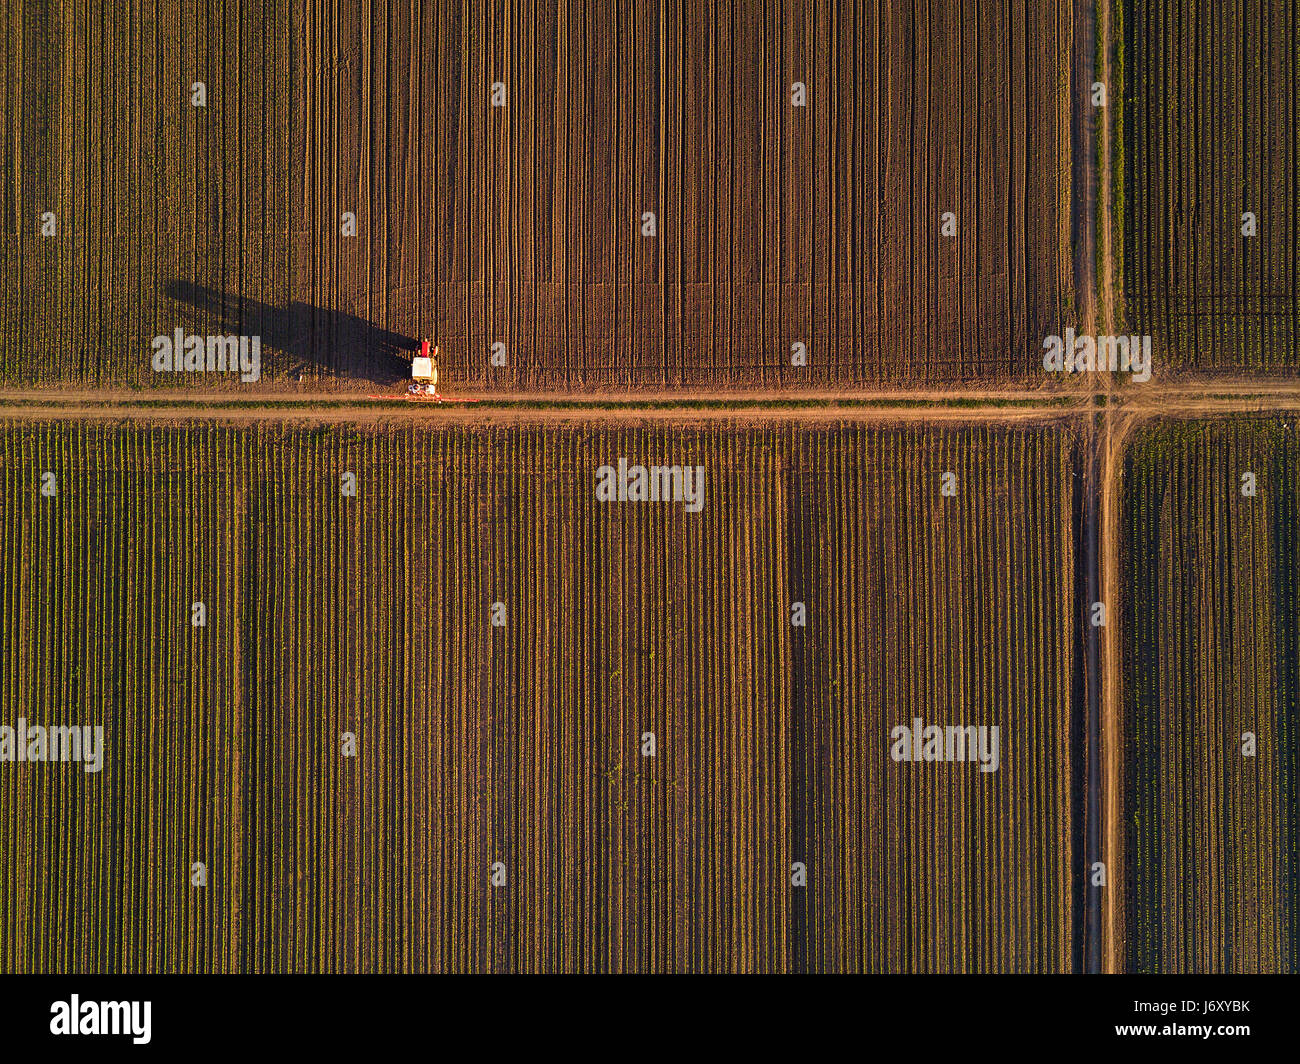 Aerial view of tractor in cultivated corn maize crop field, agricultural machinery with crop sprayer spraying pesticide chemical on plantation Stock Photo